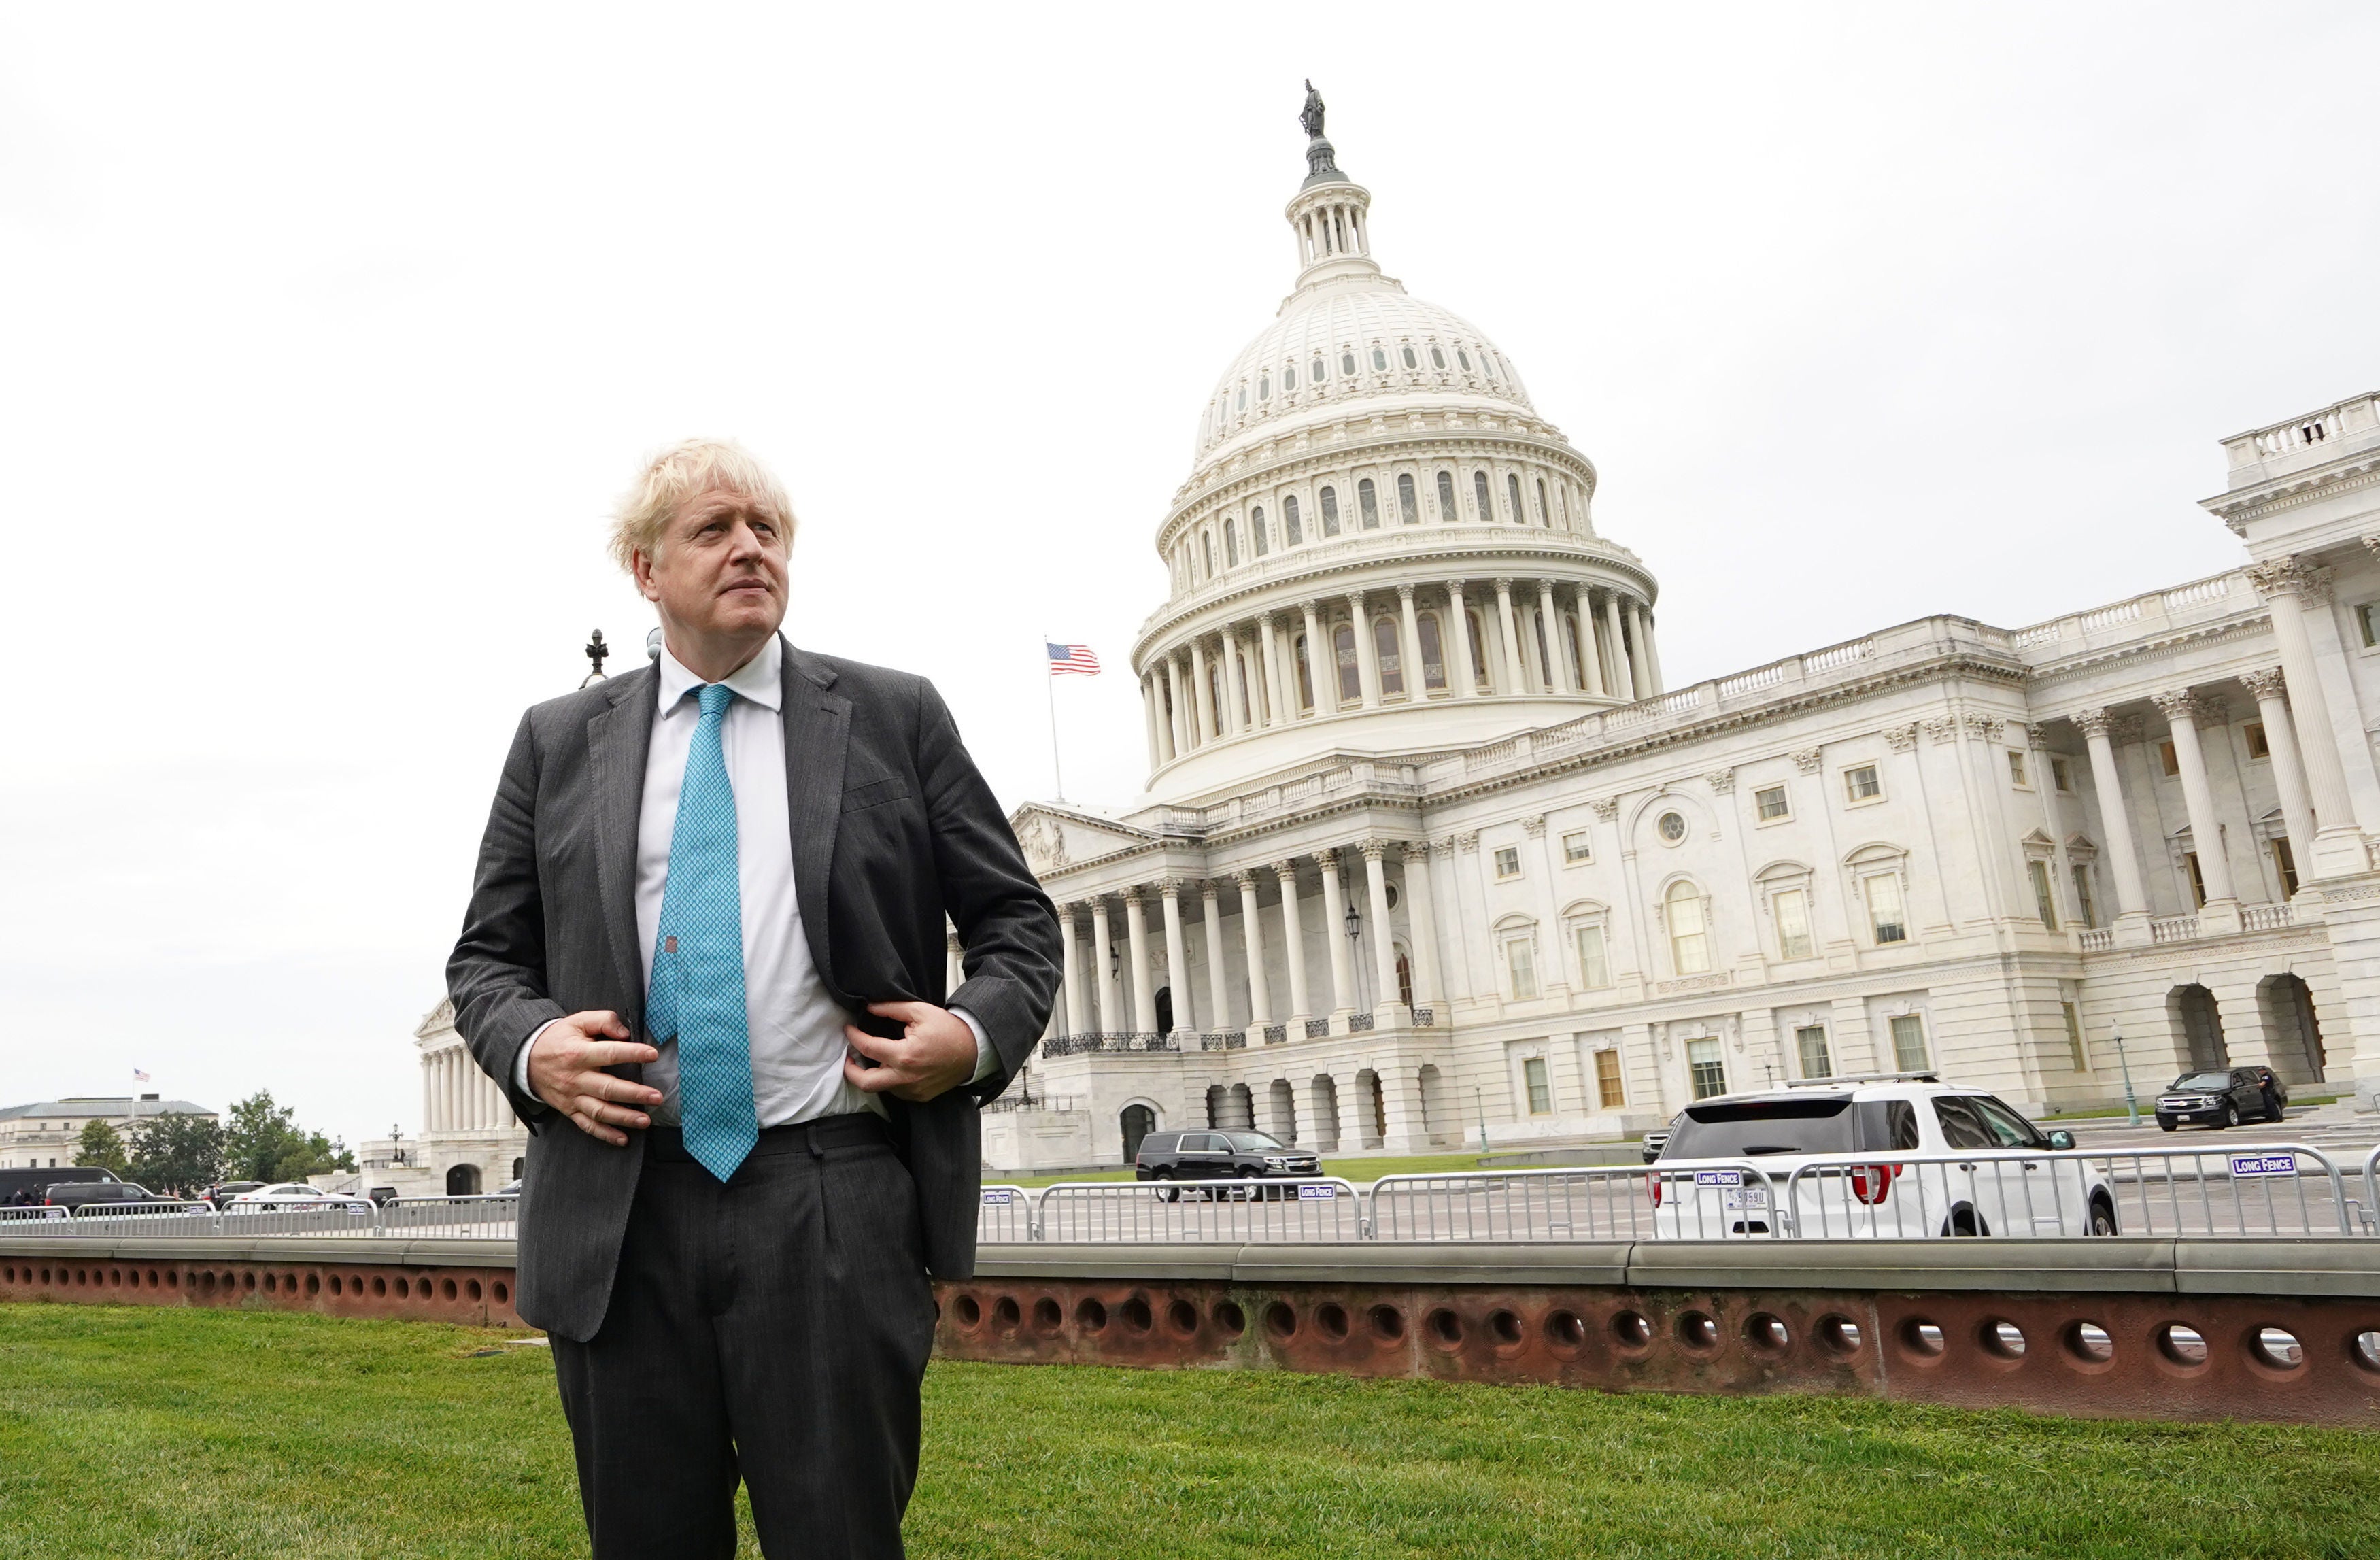 The PM outside the Capitol Building in Washington on Wednesday